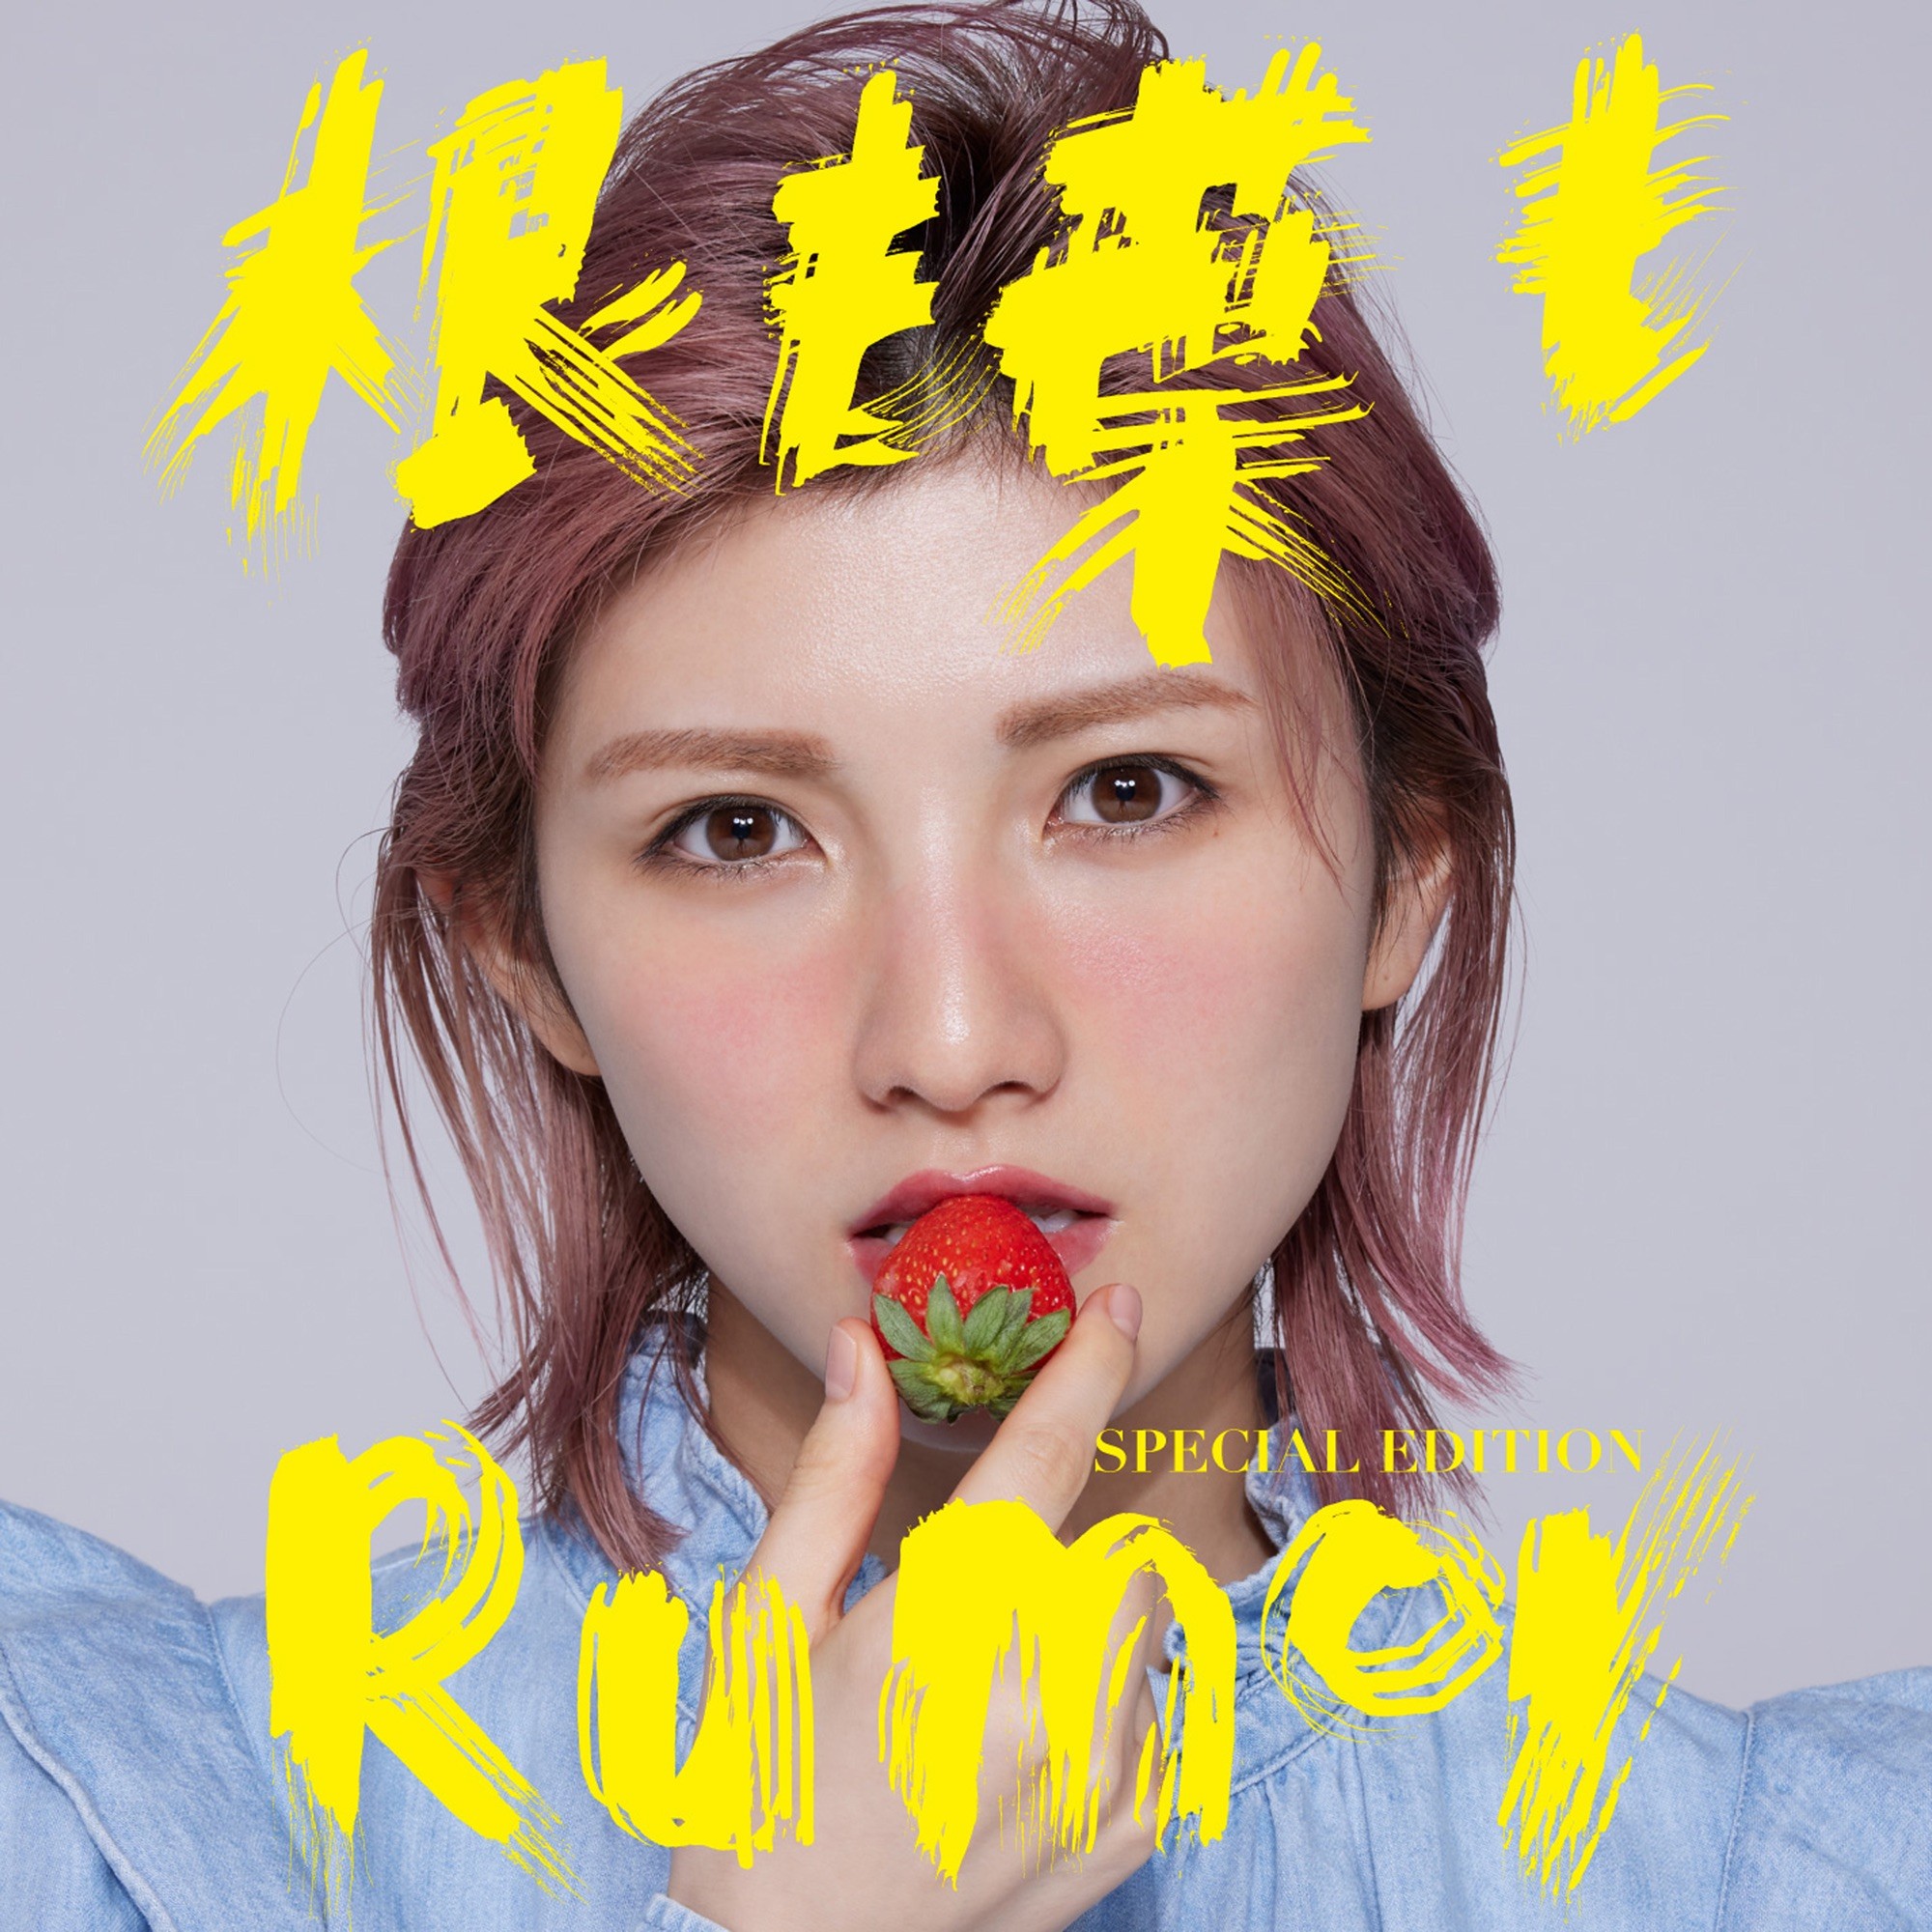 AKB48 - 根も葉もRumor (Special Edition) [FLAC 24bit/96kHz]